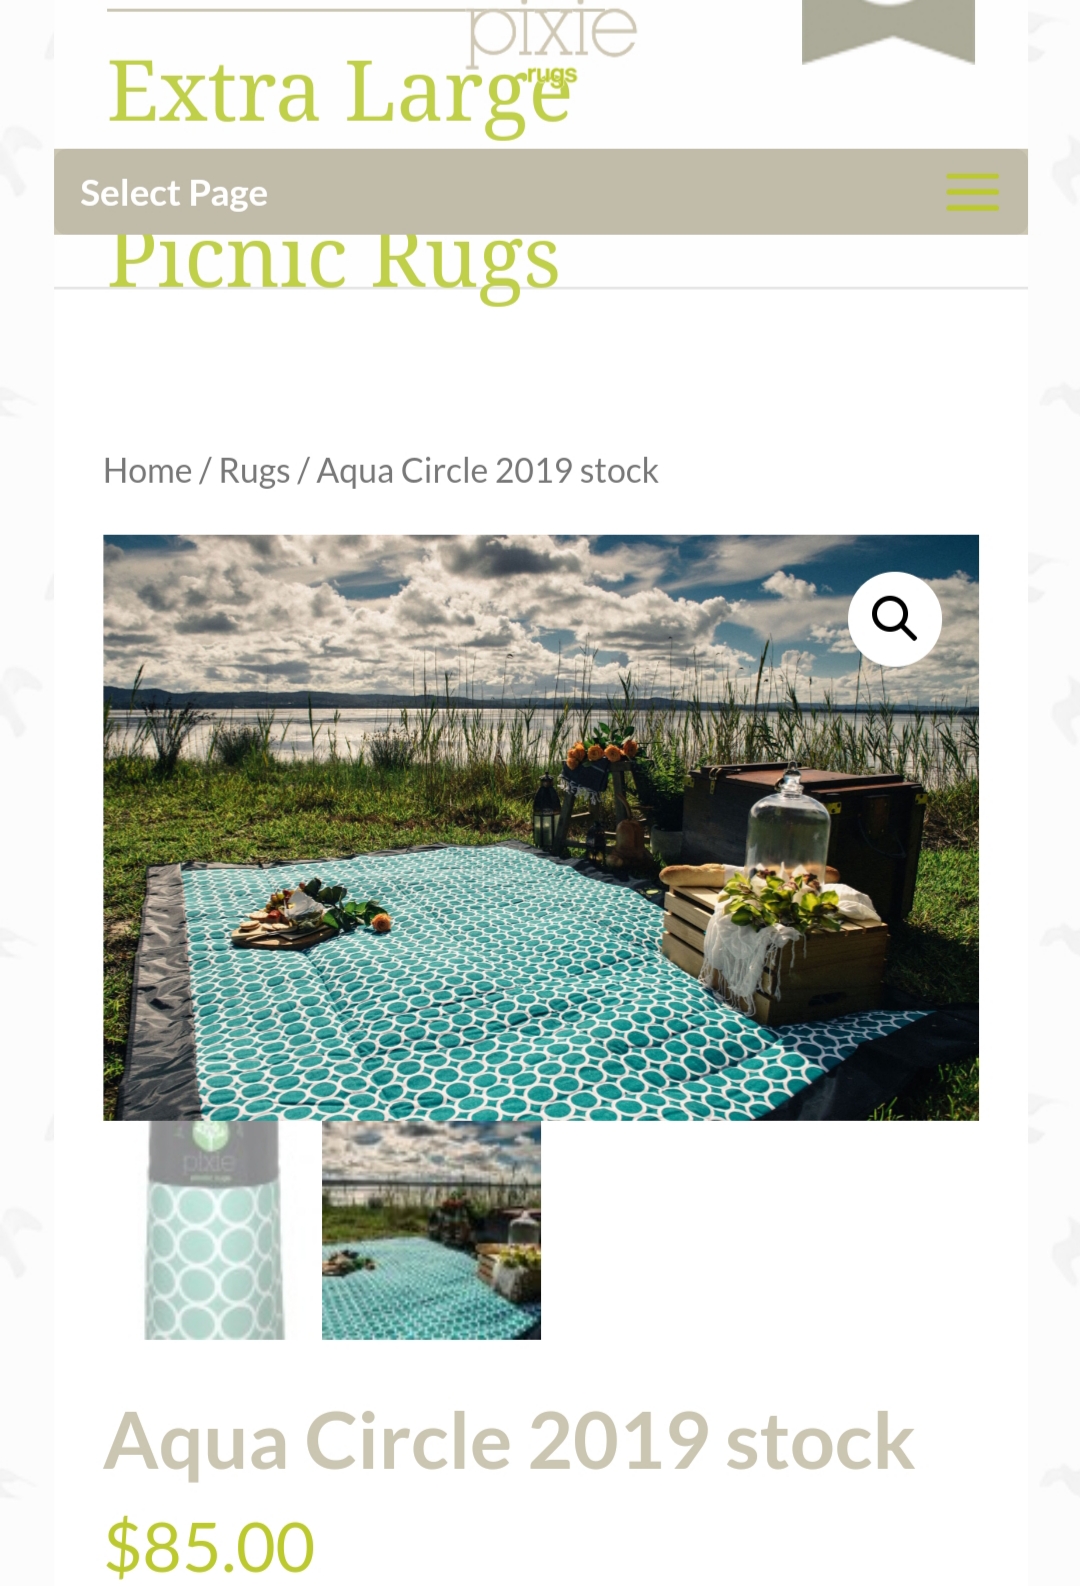 Pixie Rug.... Picnic rugs that are baby proof... Amazing!